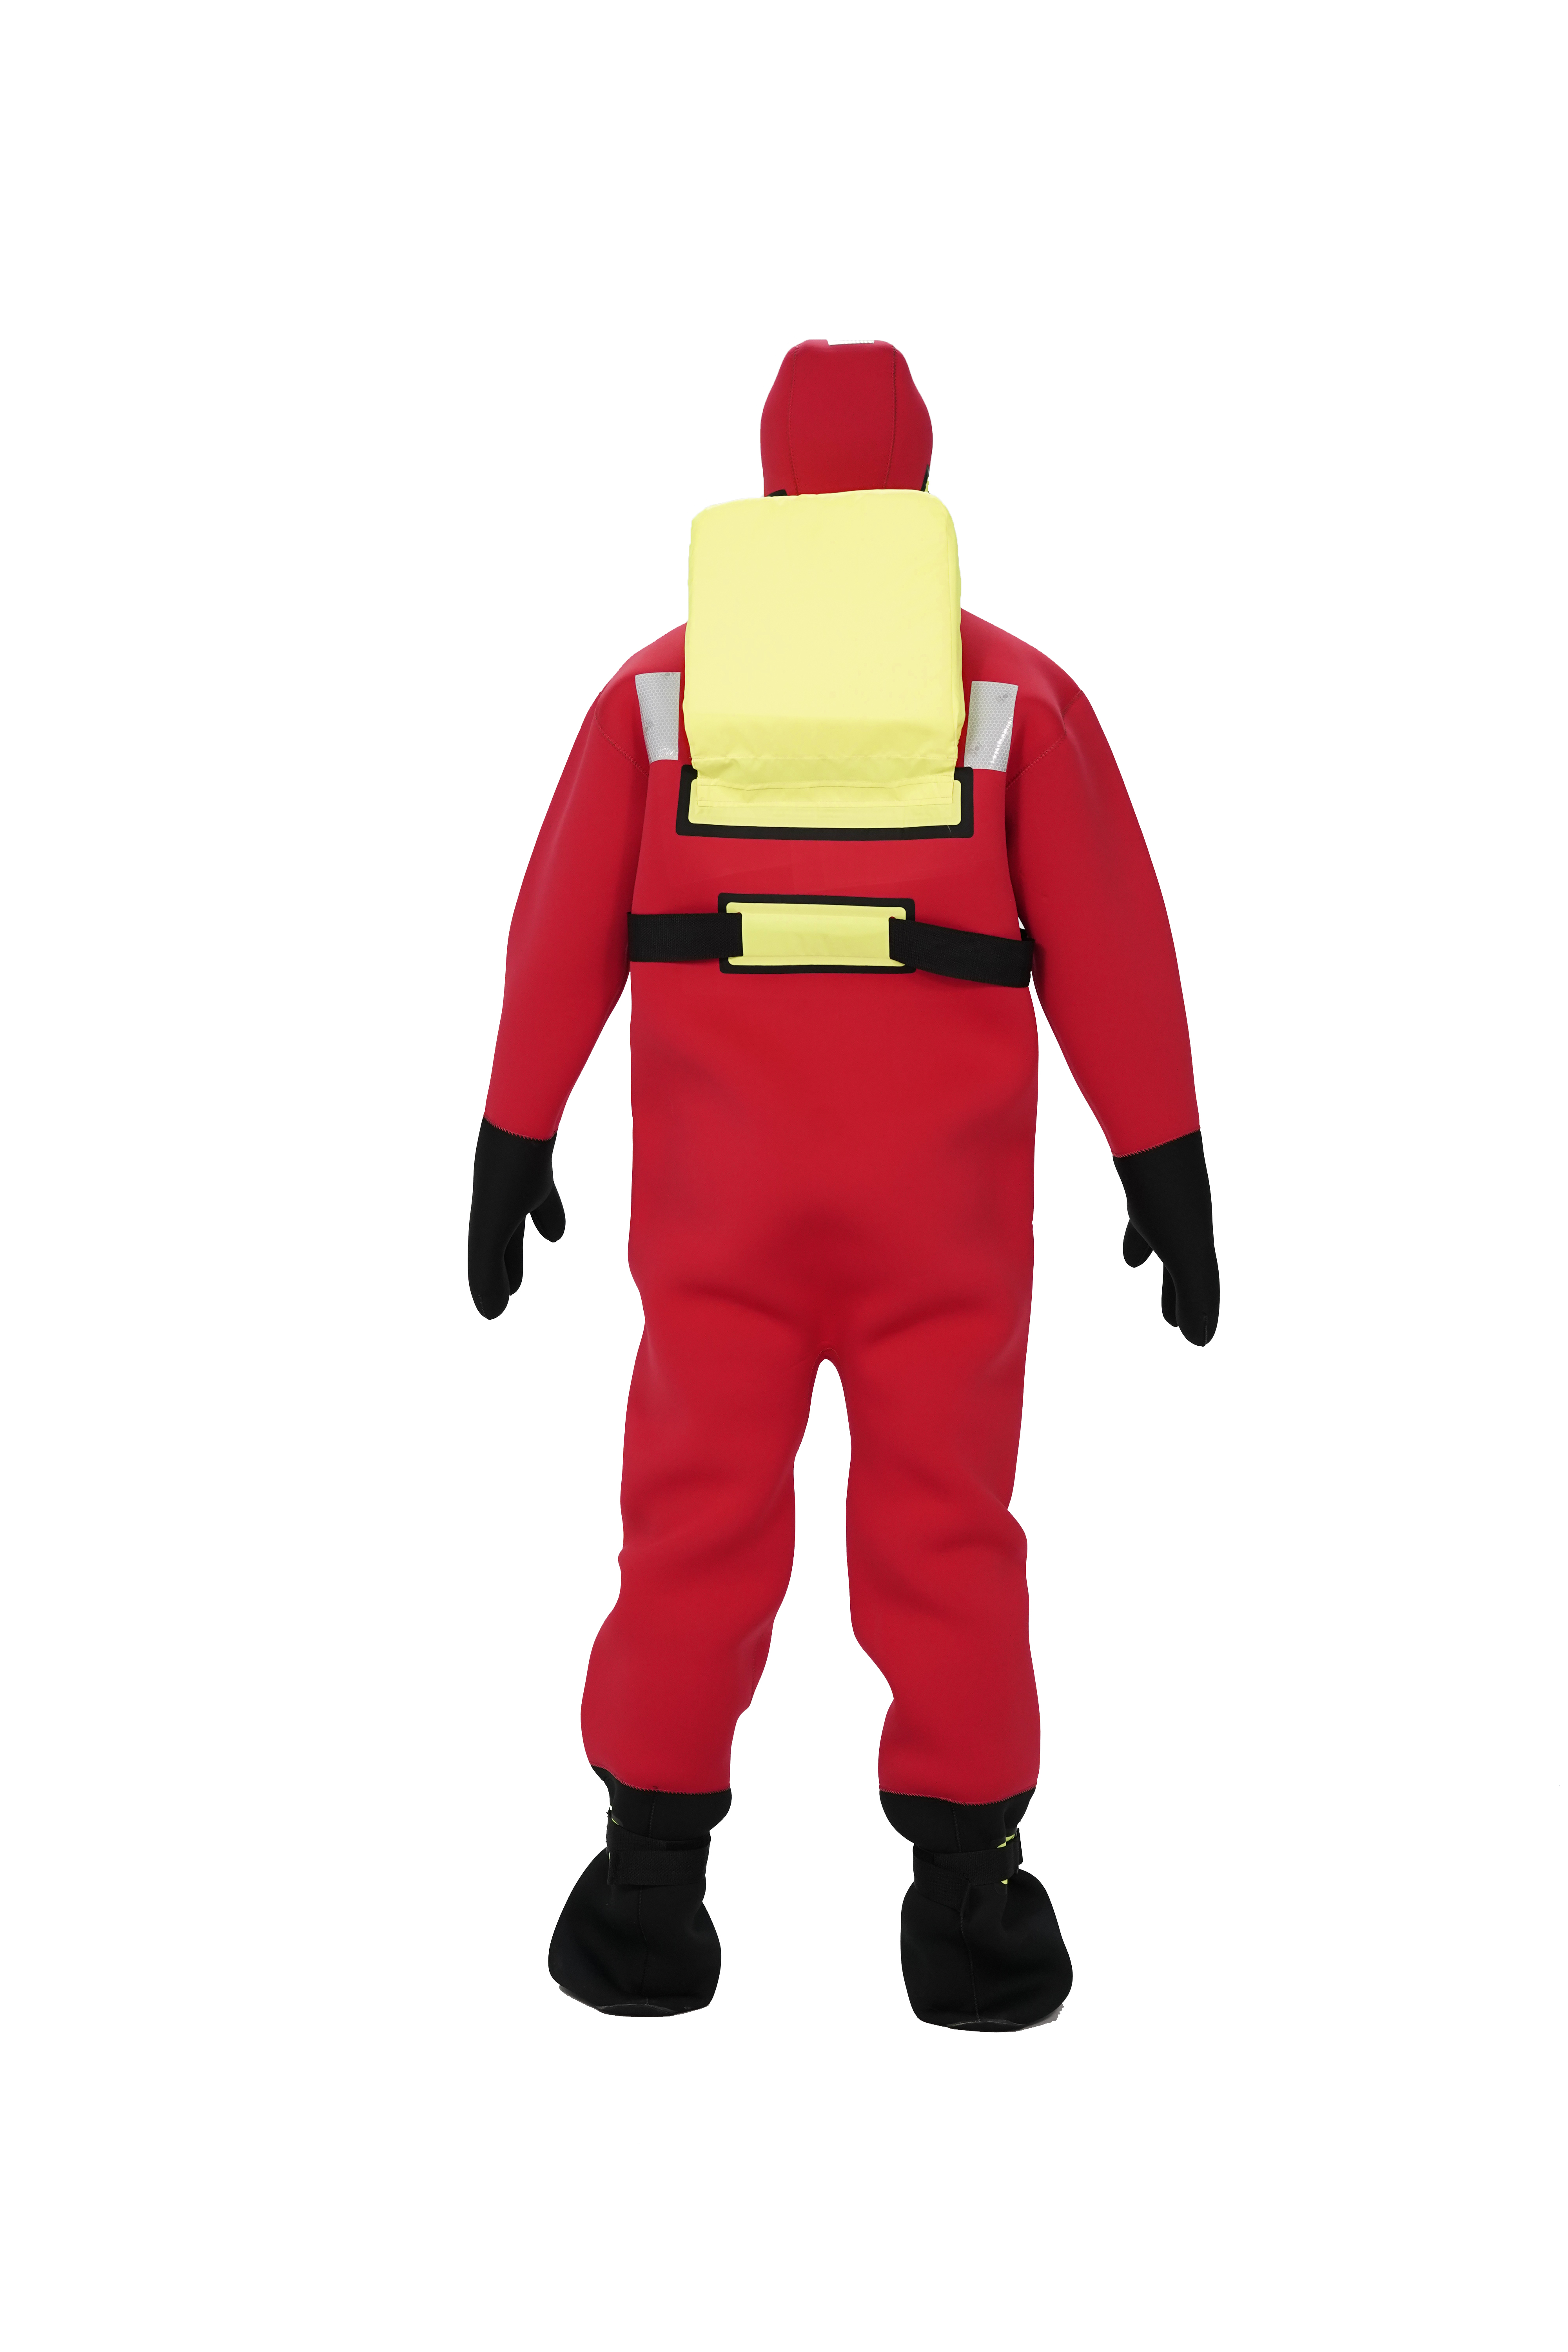 MER APPROVED INSULATED IMMERSION SUIT HYF-2-R